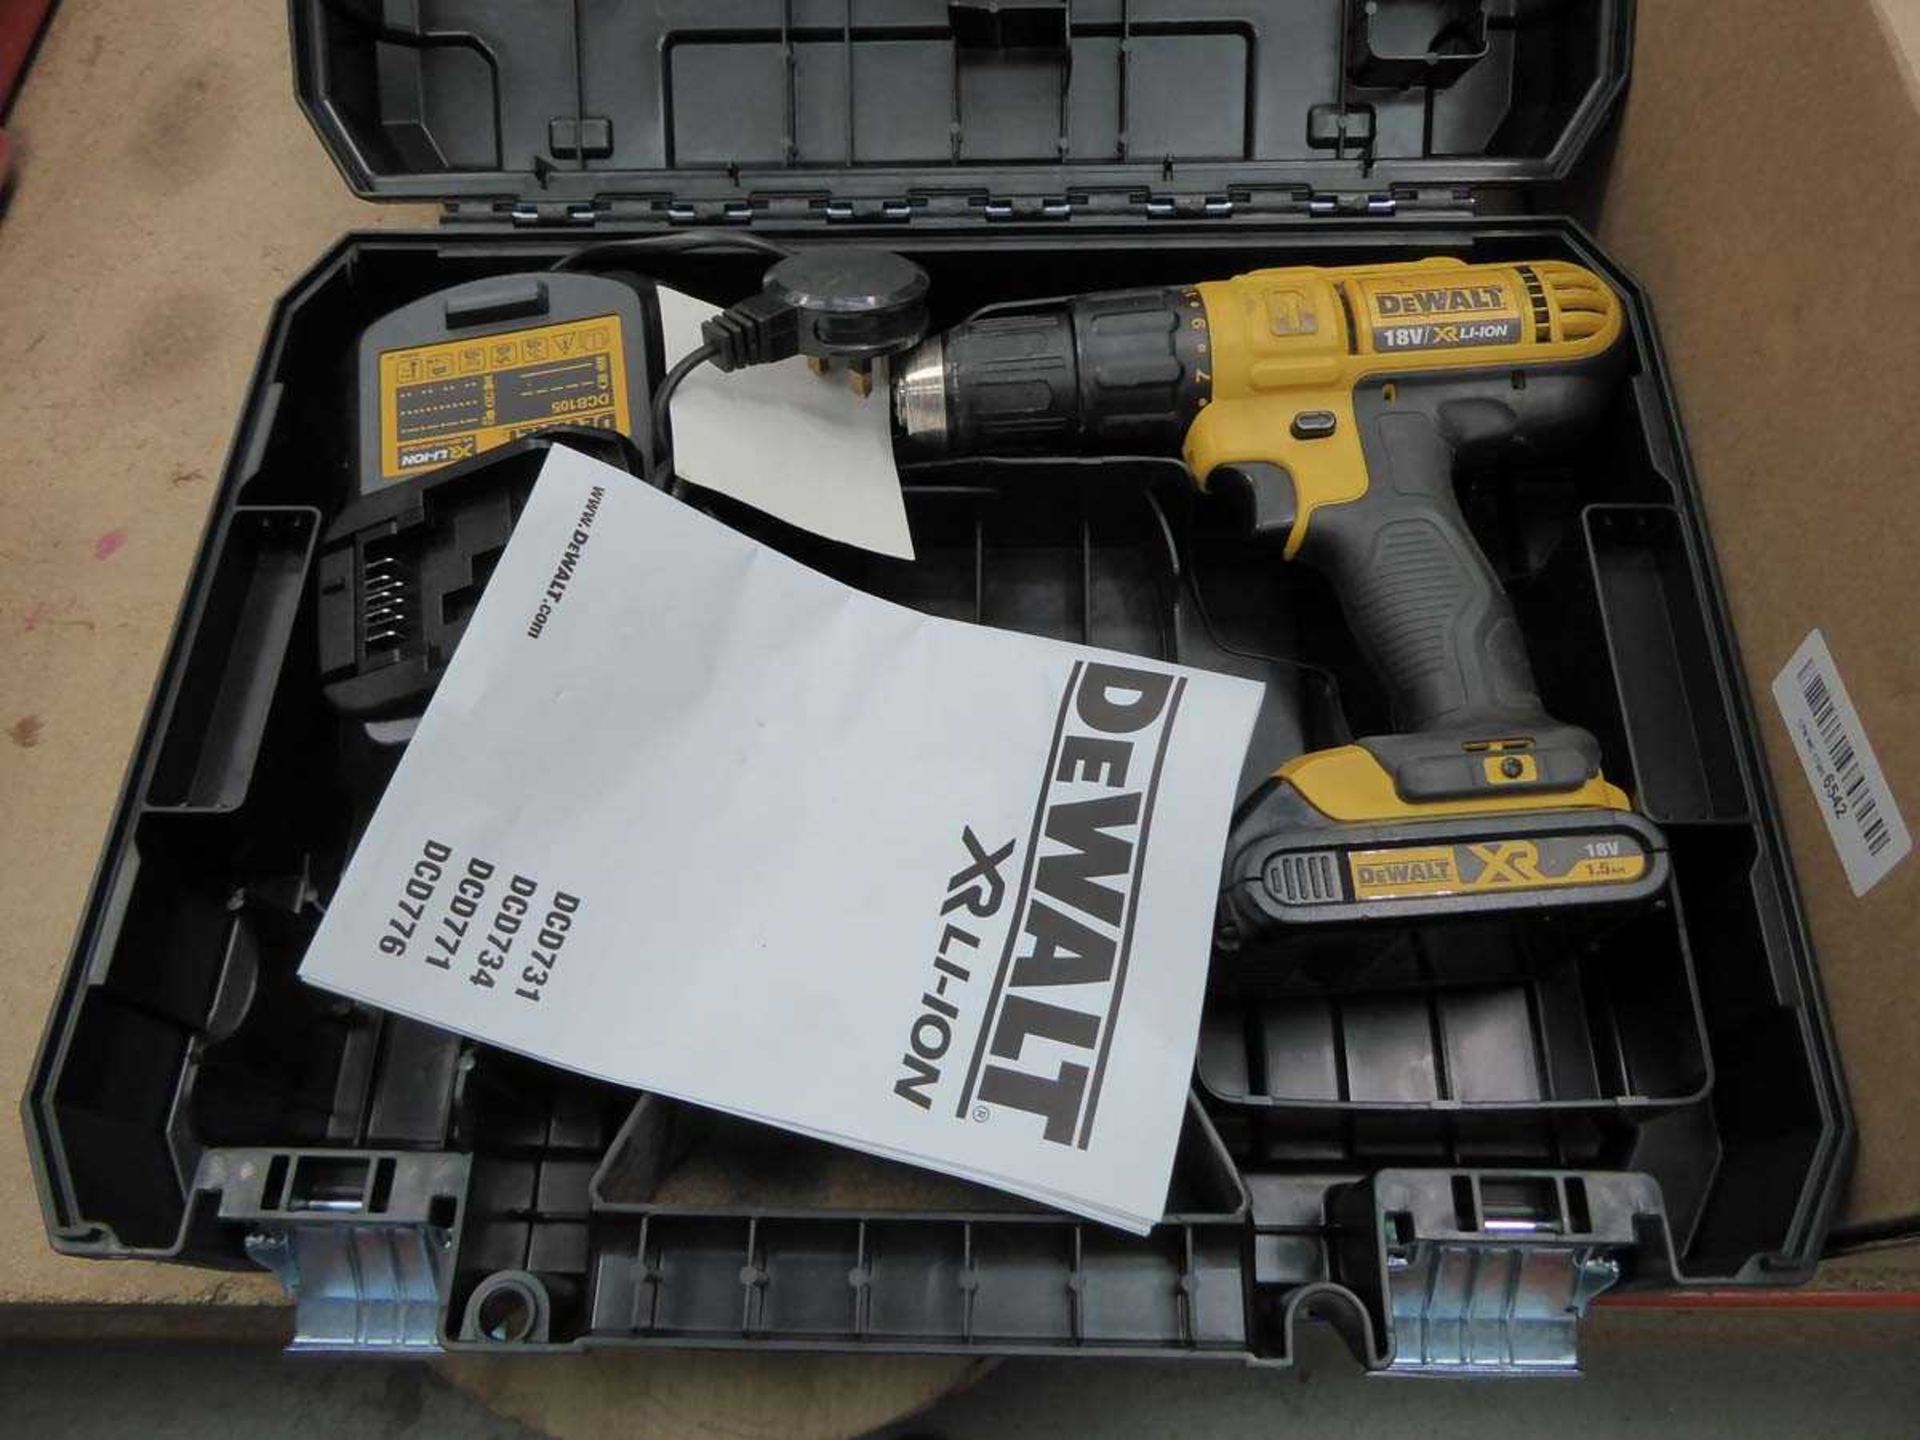 +VAT Bag of tile adhesive, smart ceramic wall light. DeWalt 18v drill with battery and charger - Image 5 of 6